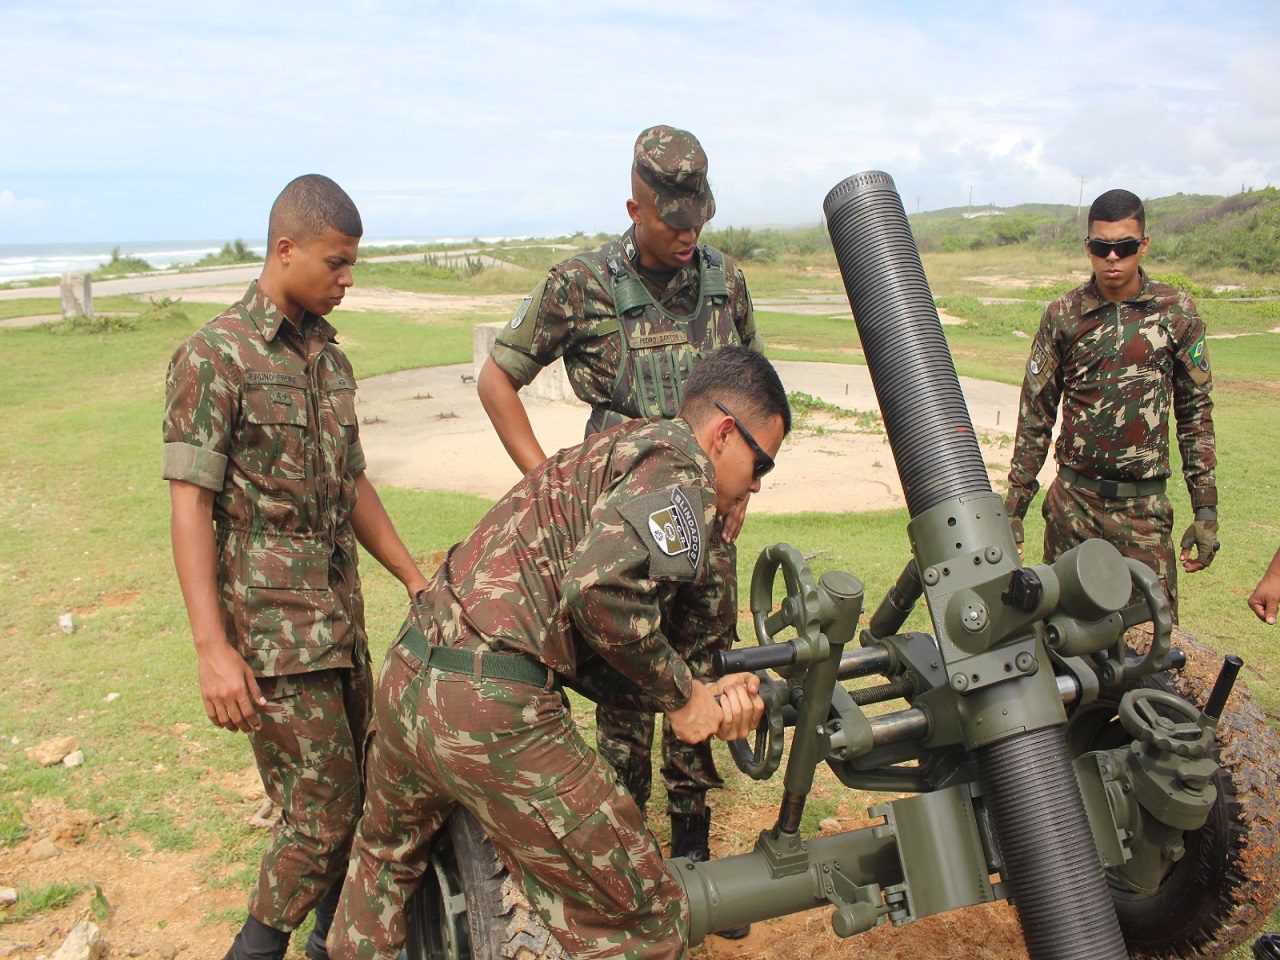 War Arsenal completes test of new mortars